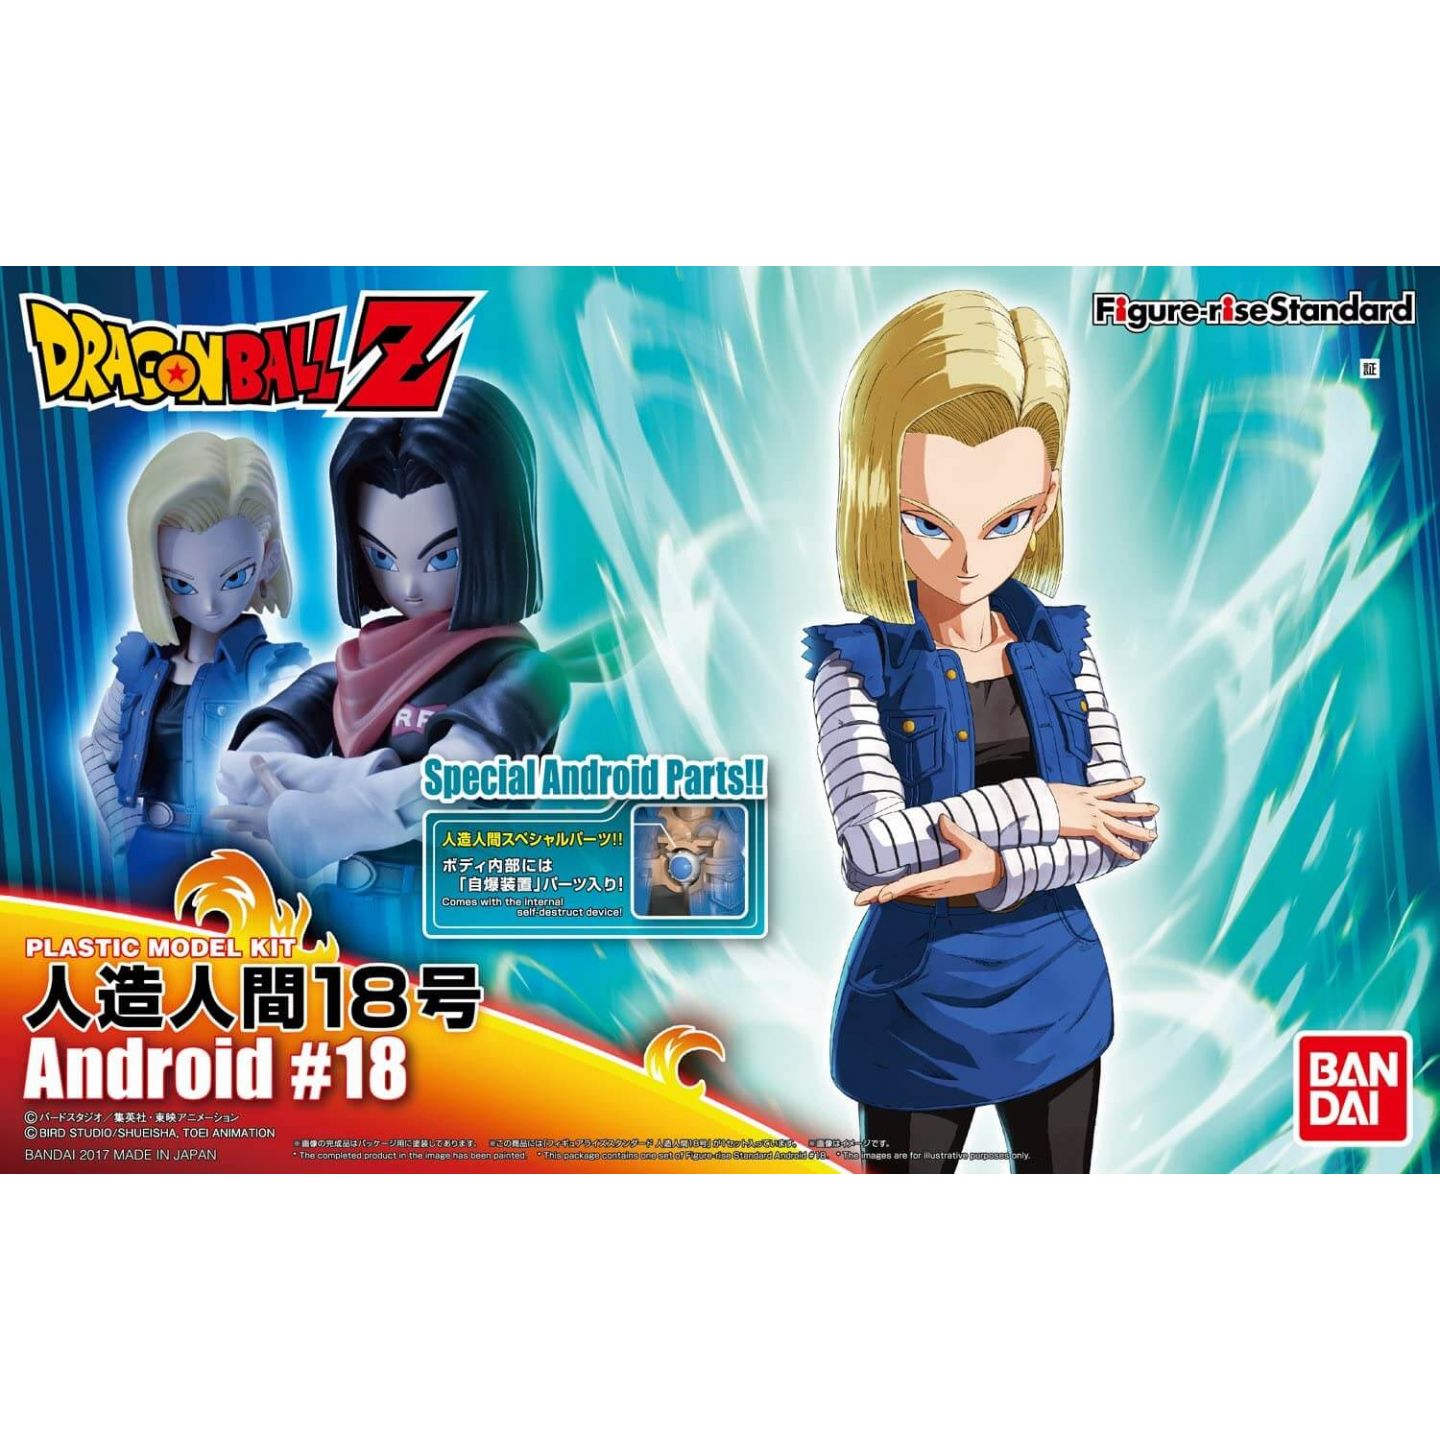 Details about   Bandai Figure-Rise Standard Dragon Ball DB GT ANDROID #17 Plastic Model Kit